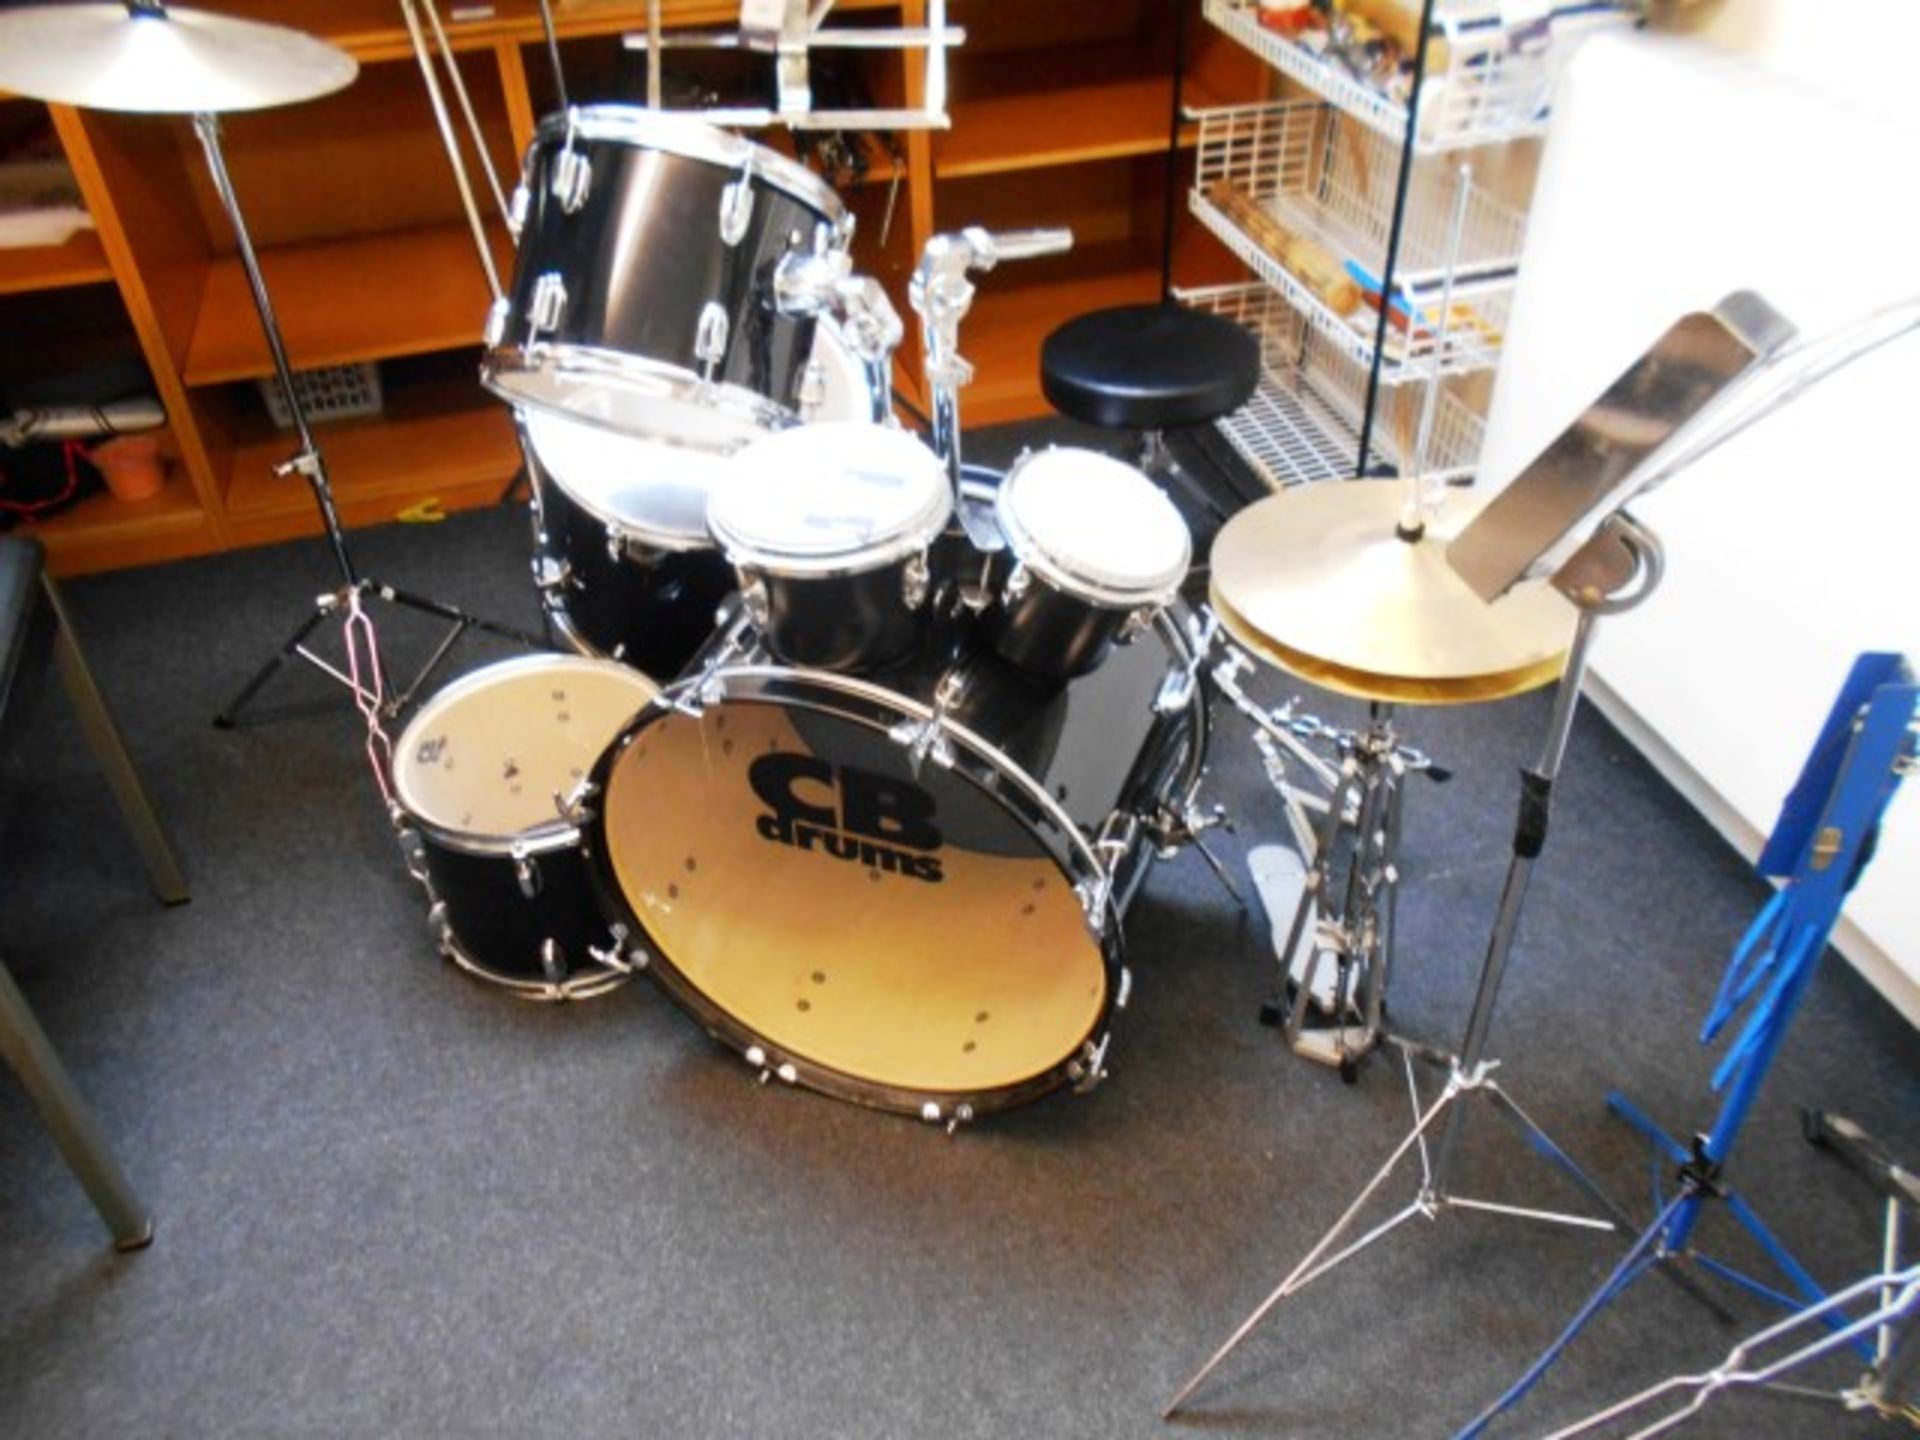 CB Drums 8-piece Drum Set with stool and 3 stands